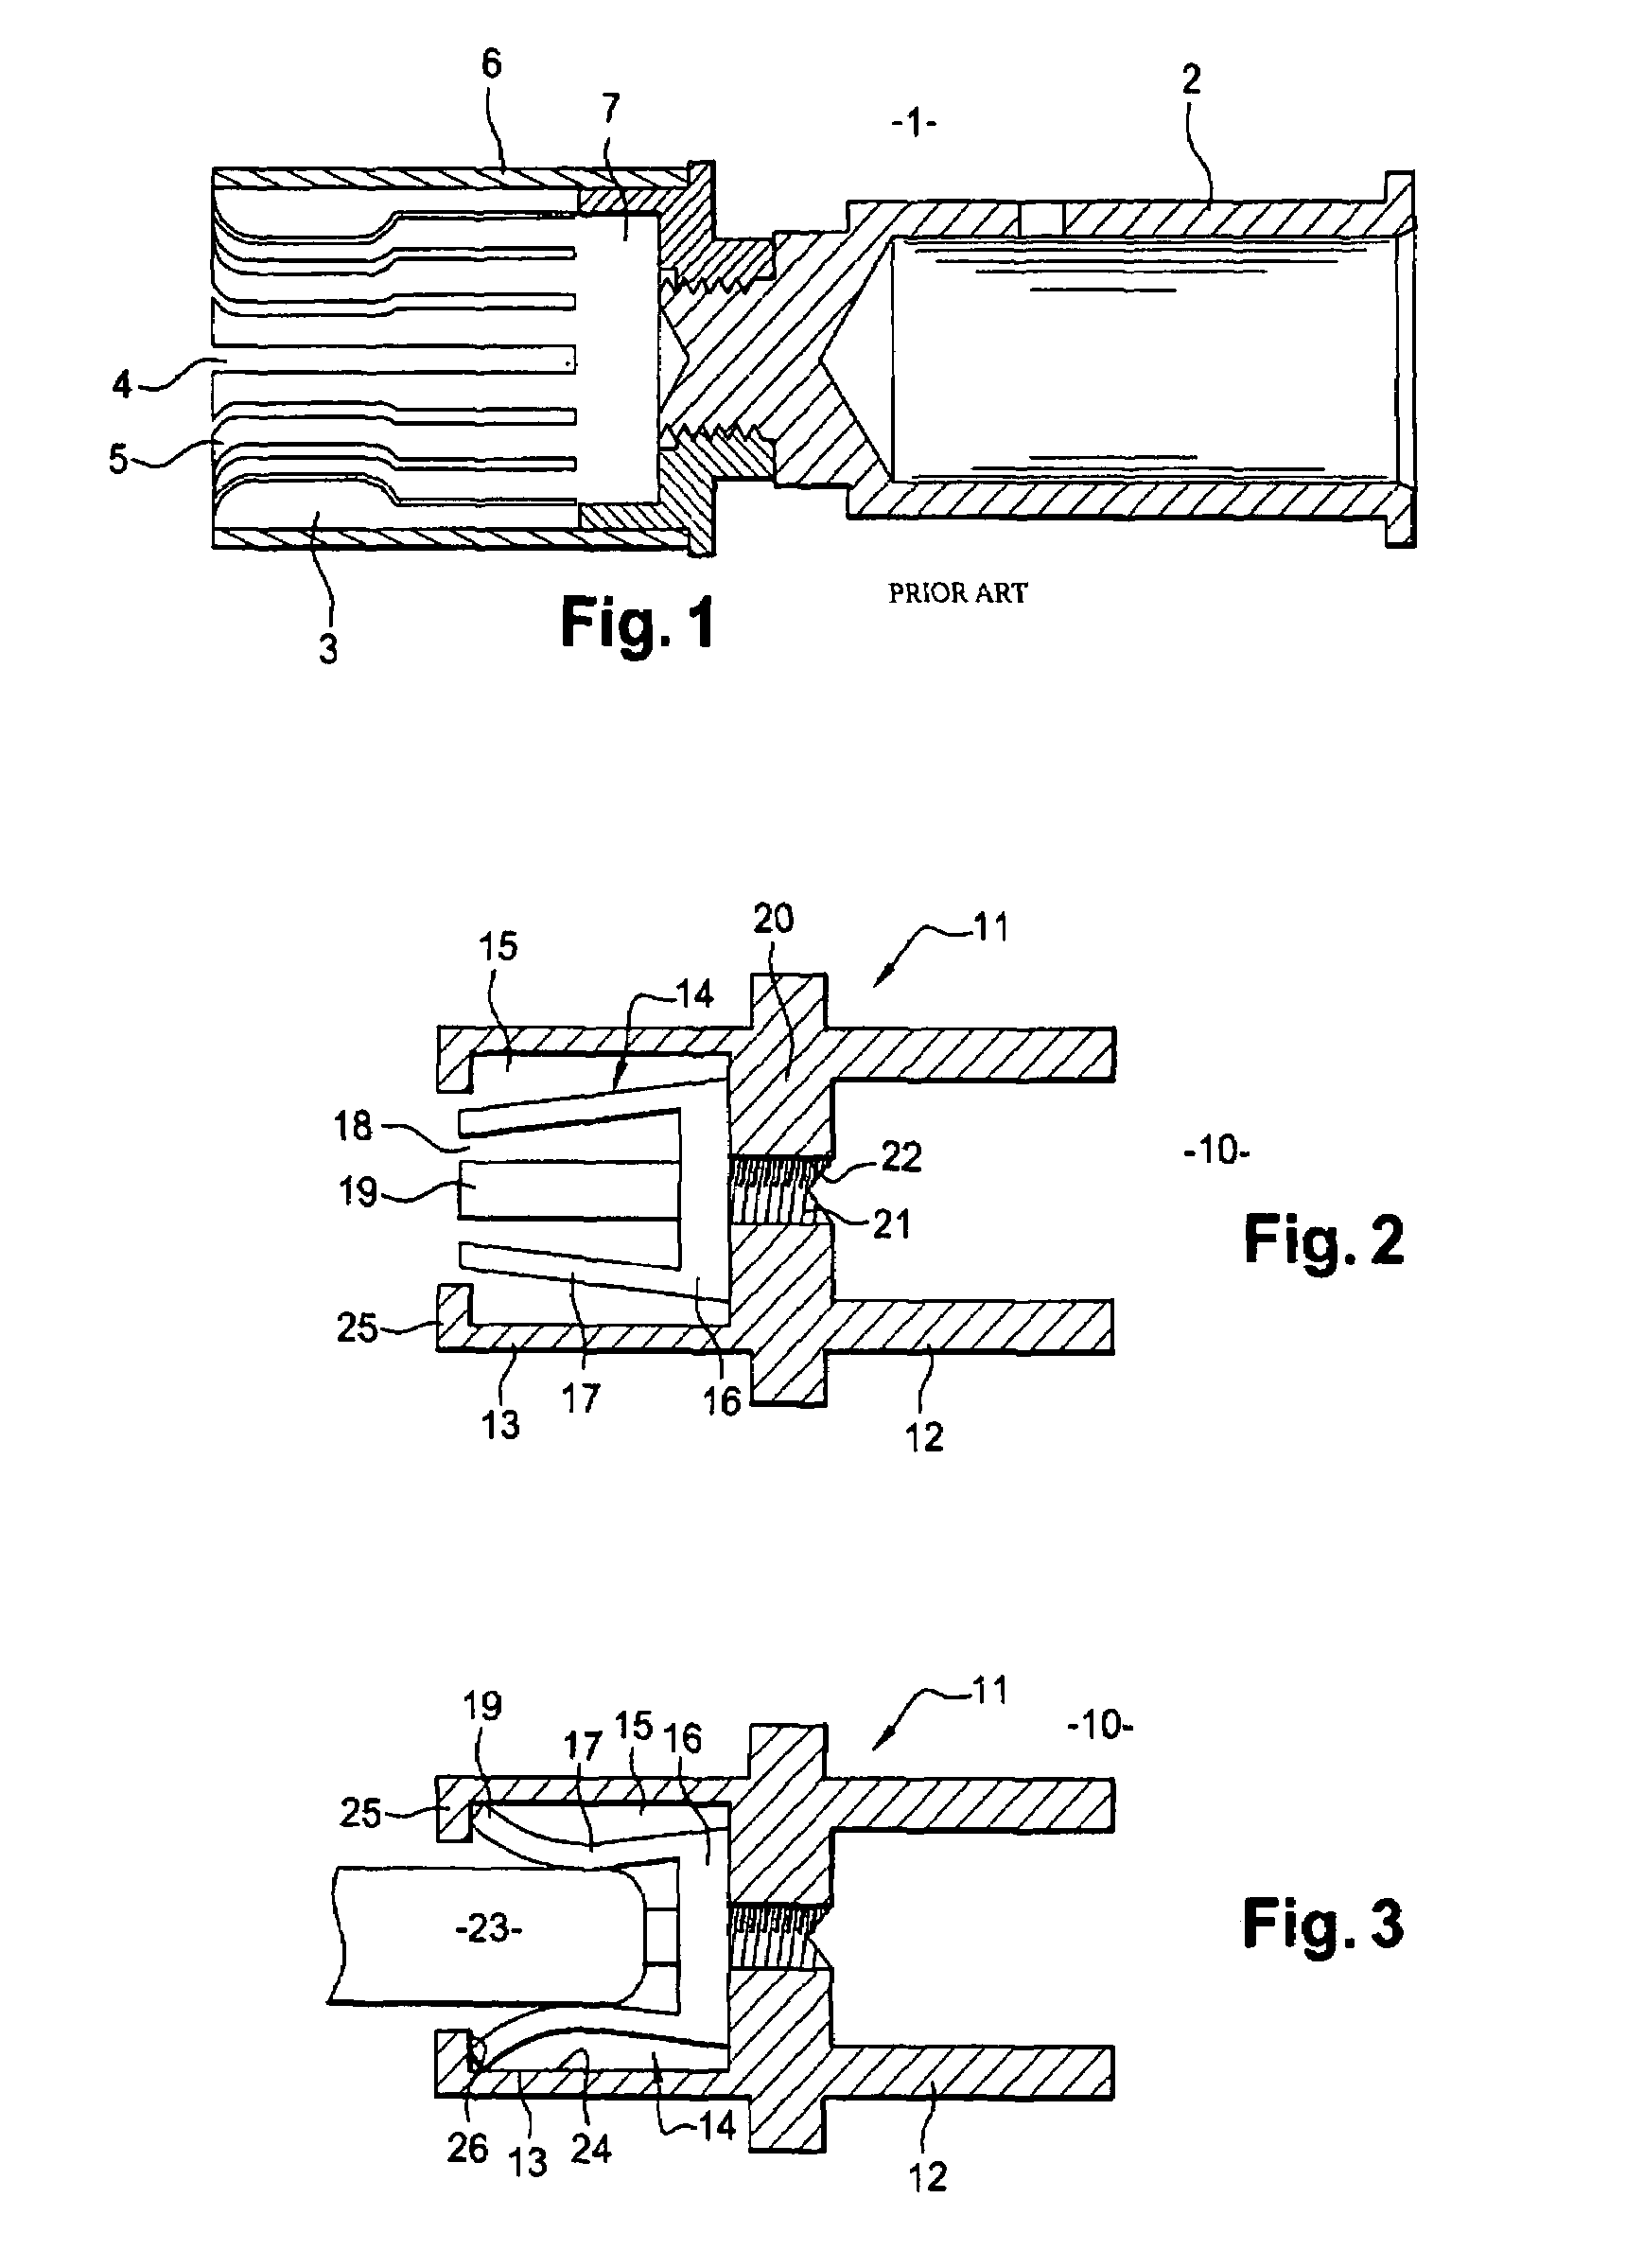 Female electrical contact element and method for making a female electrical contact element